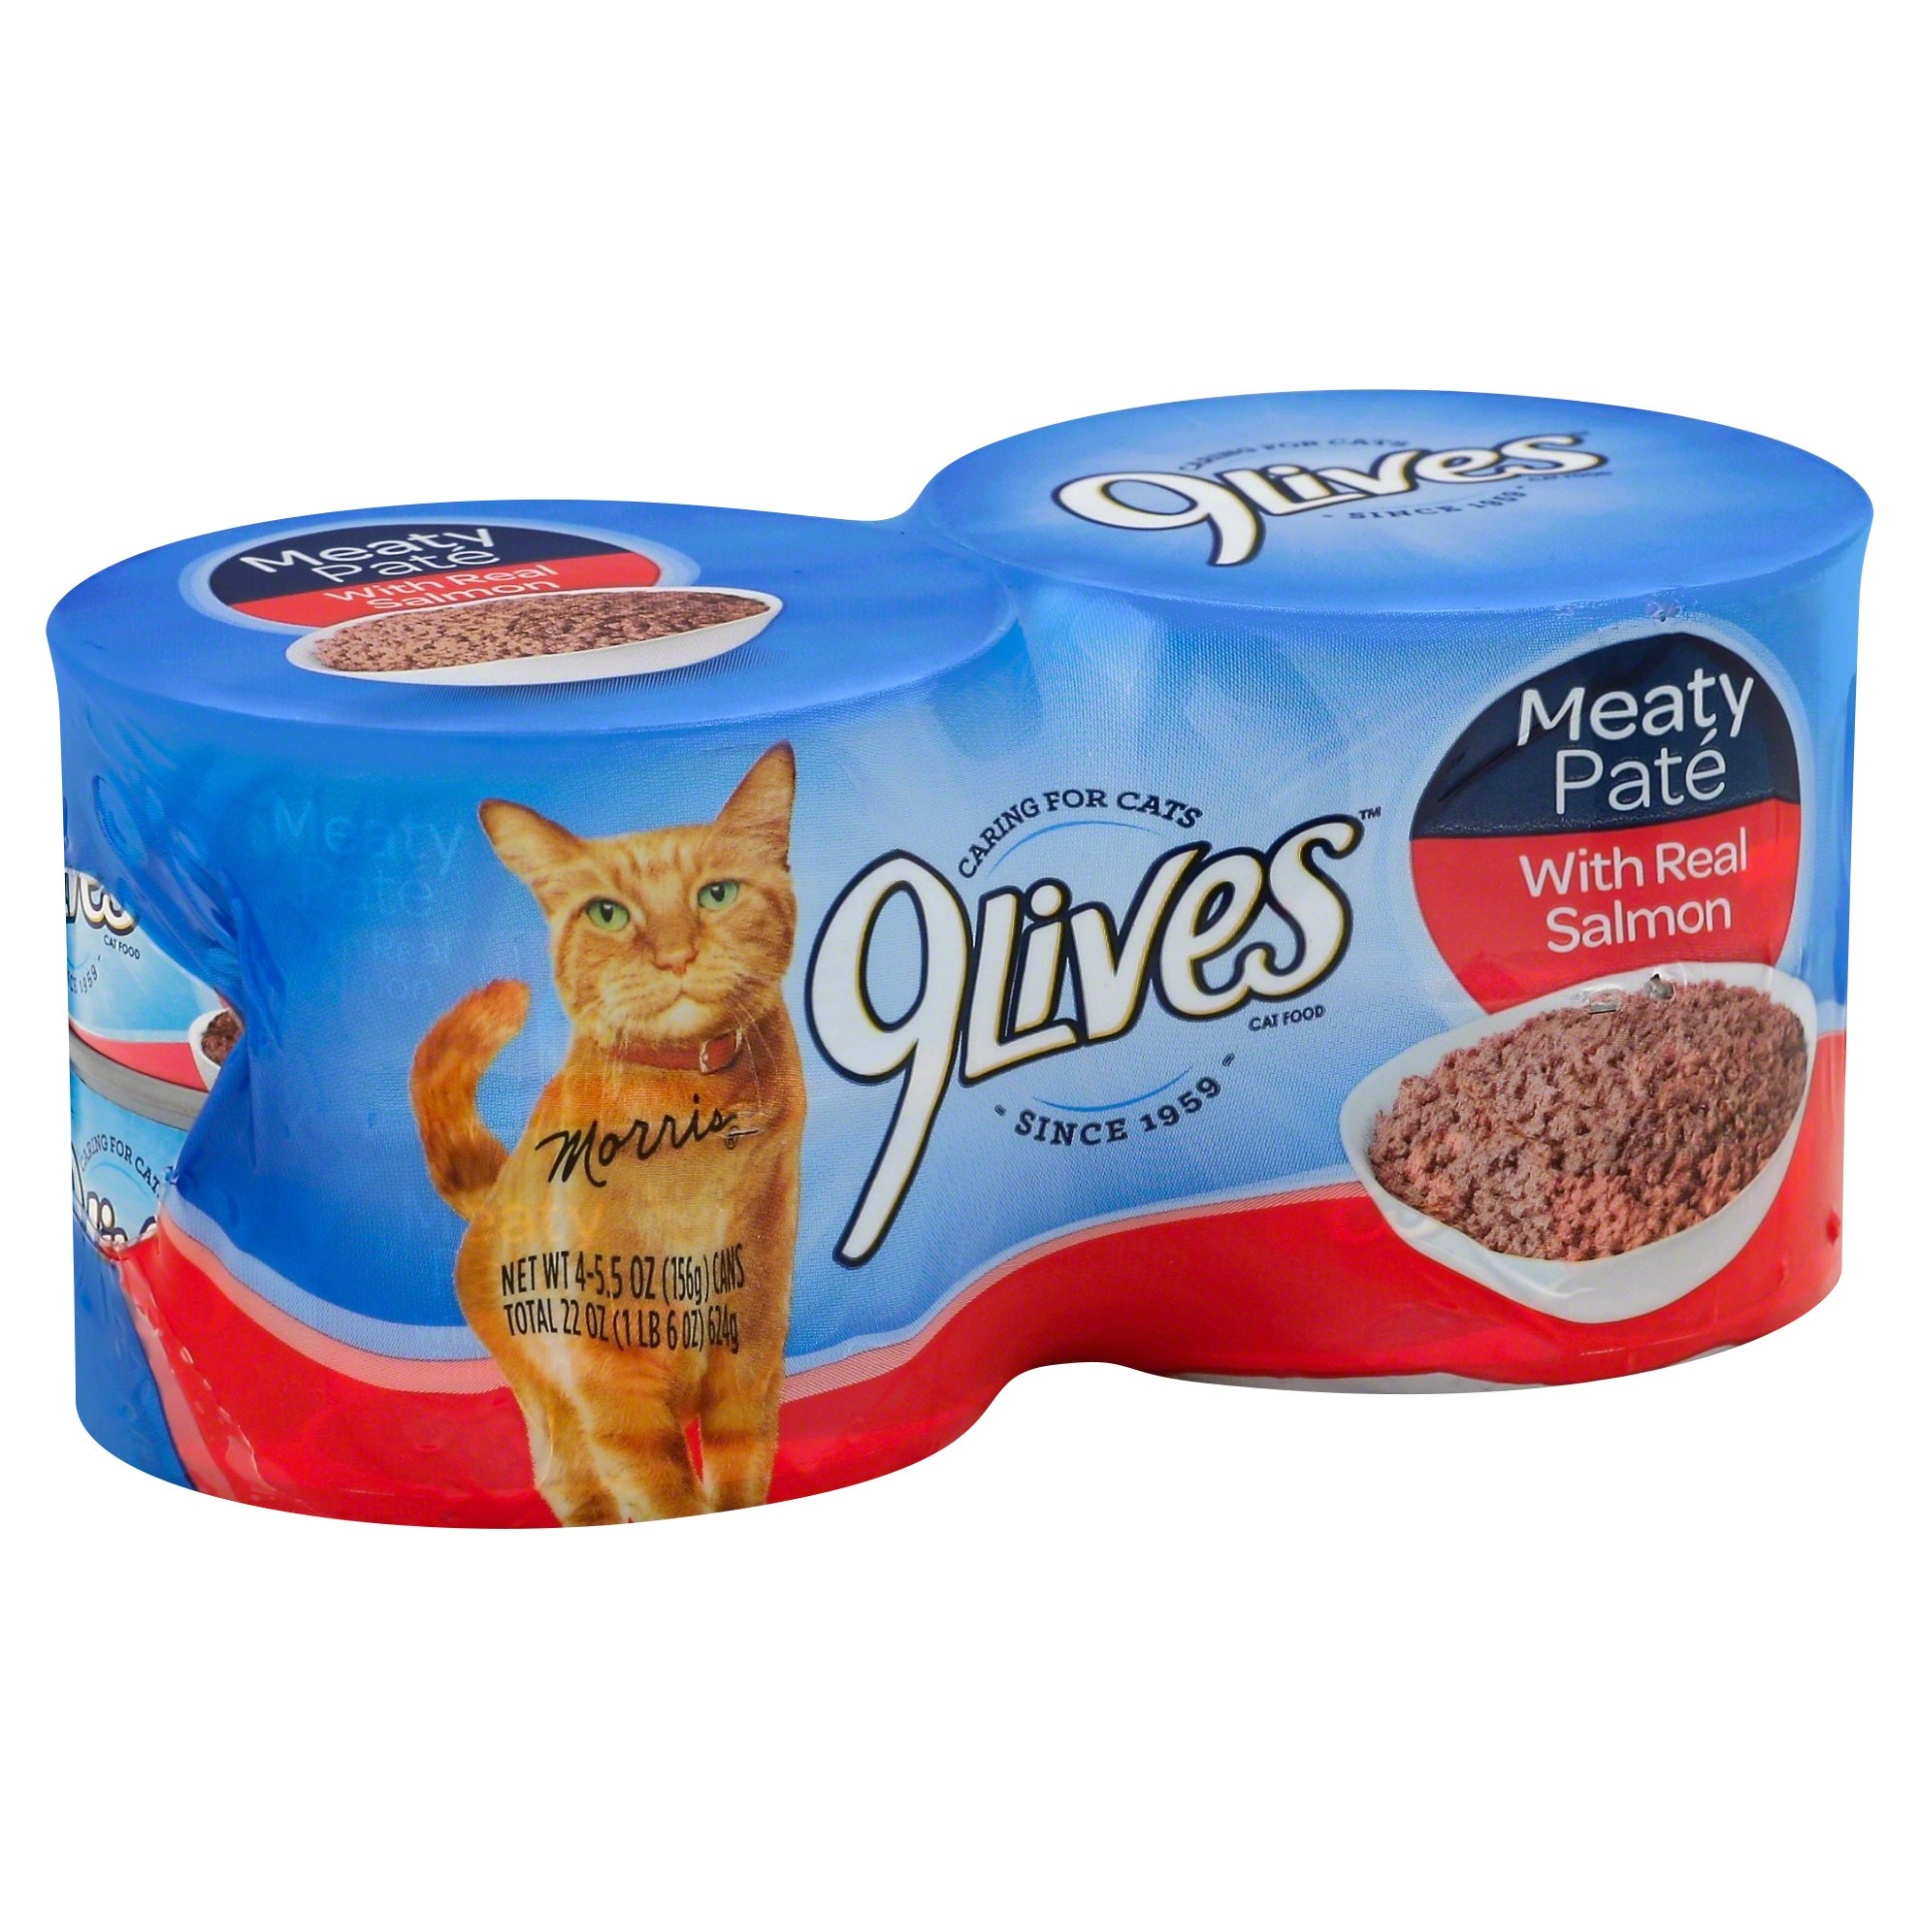 slide 1 of 6, 9Lives Cat Food, Meaty Paté with Real Salmon, 4 ct; 5.5 oz